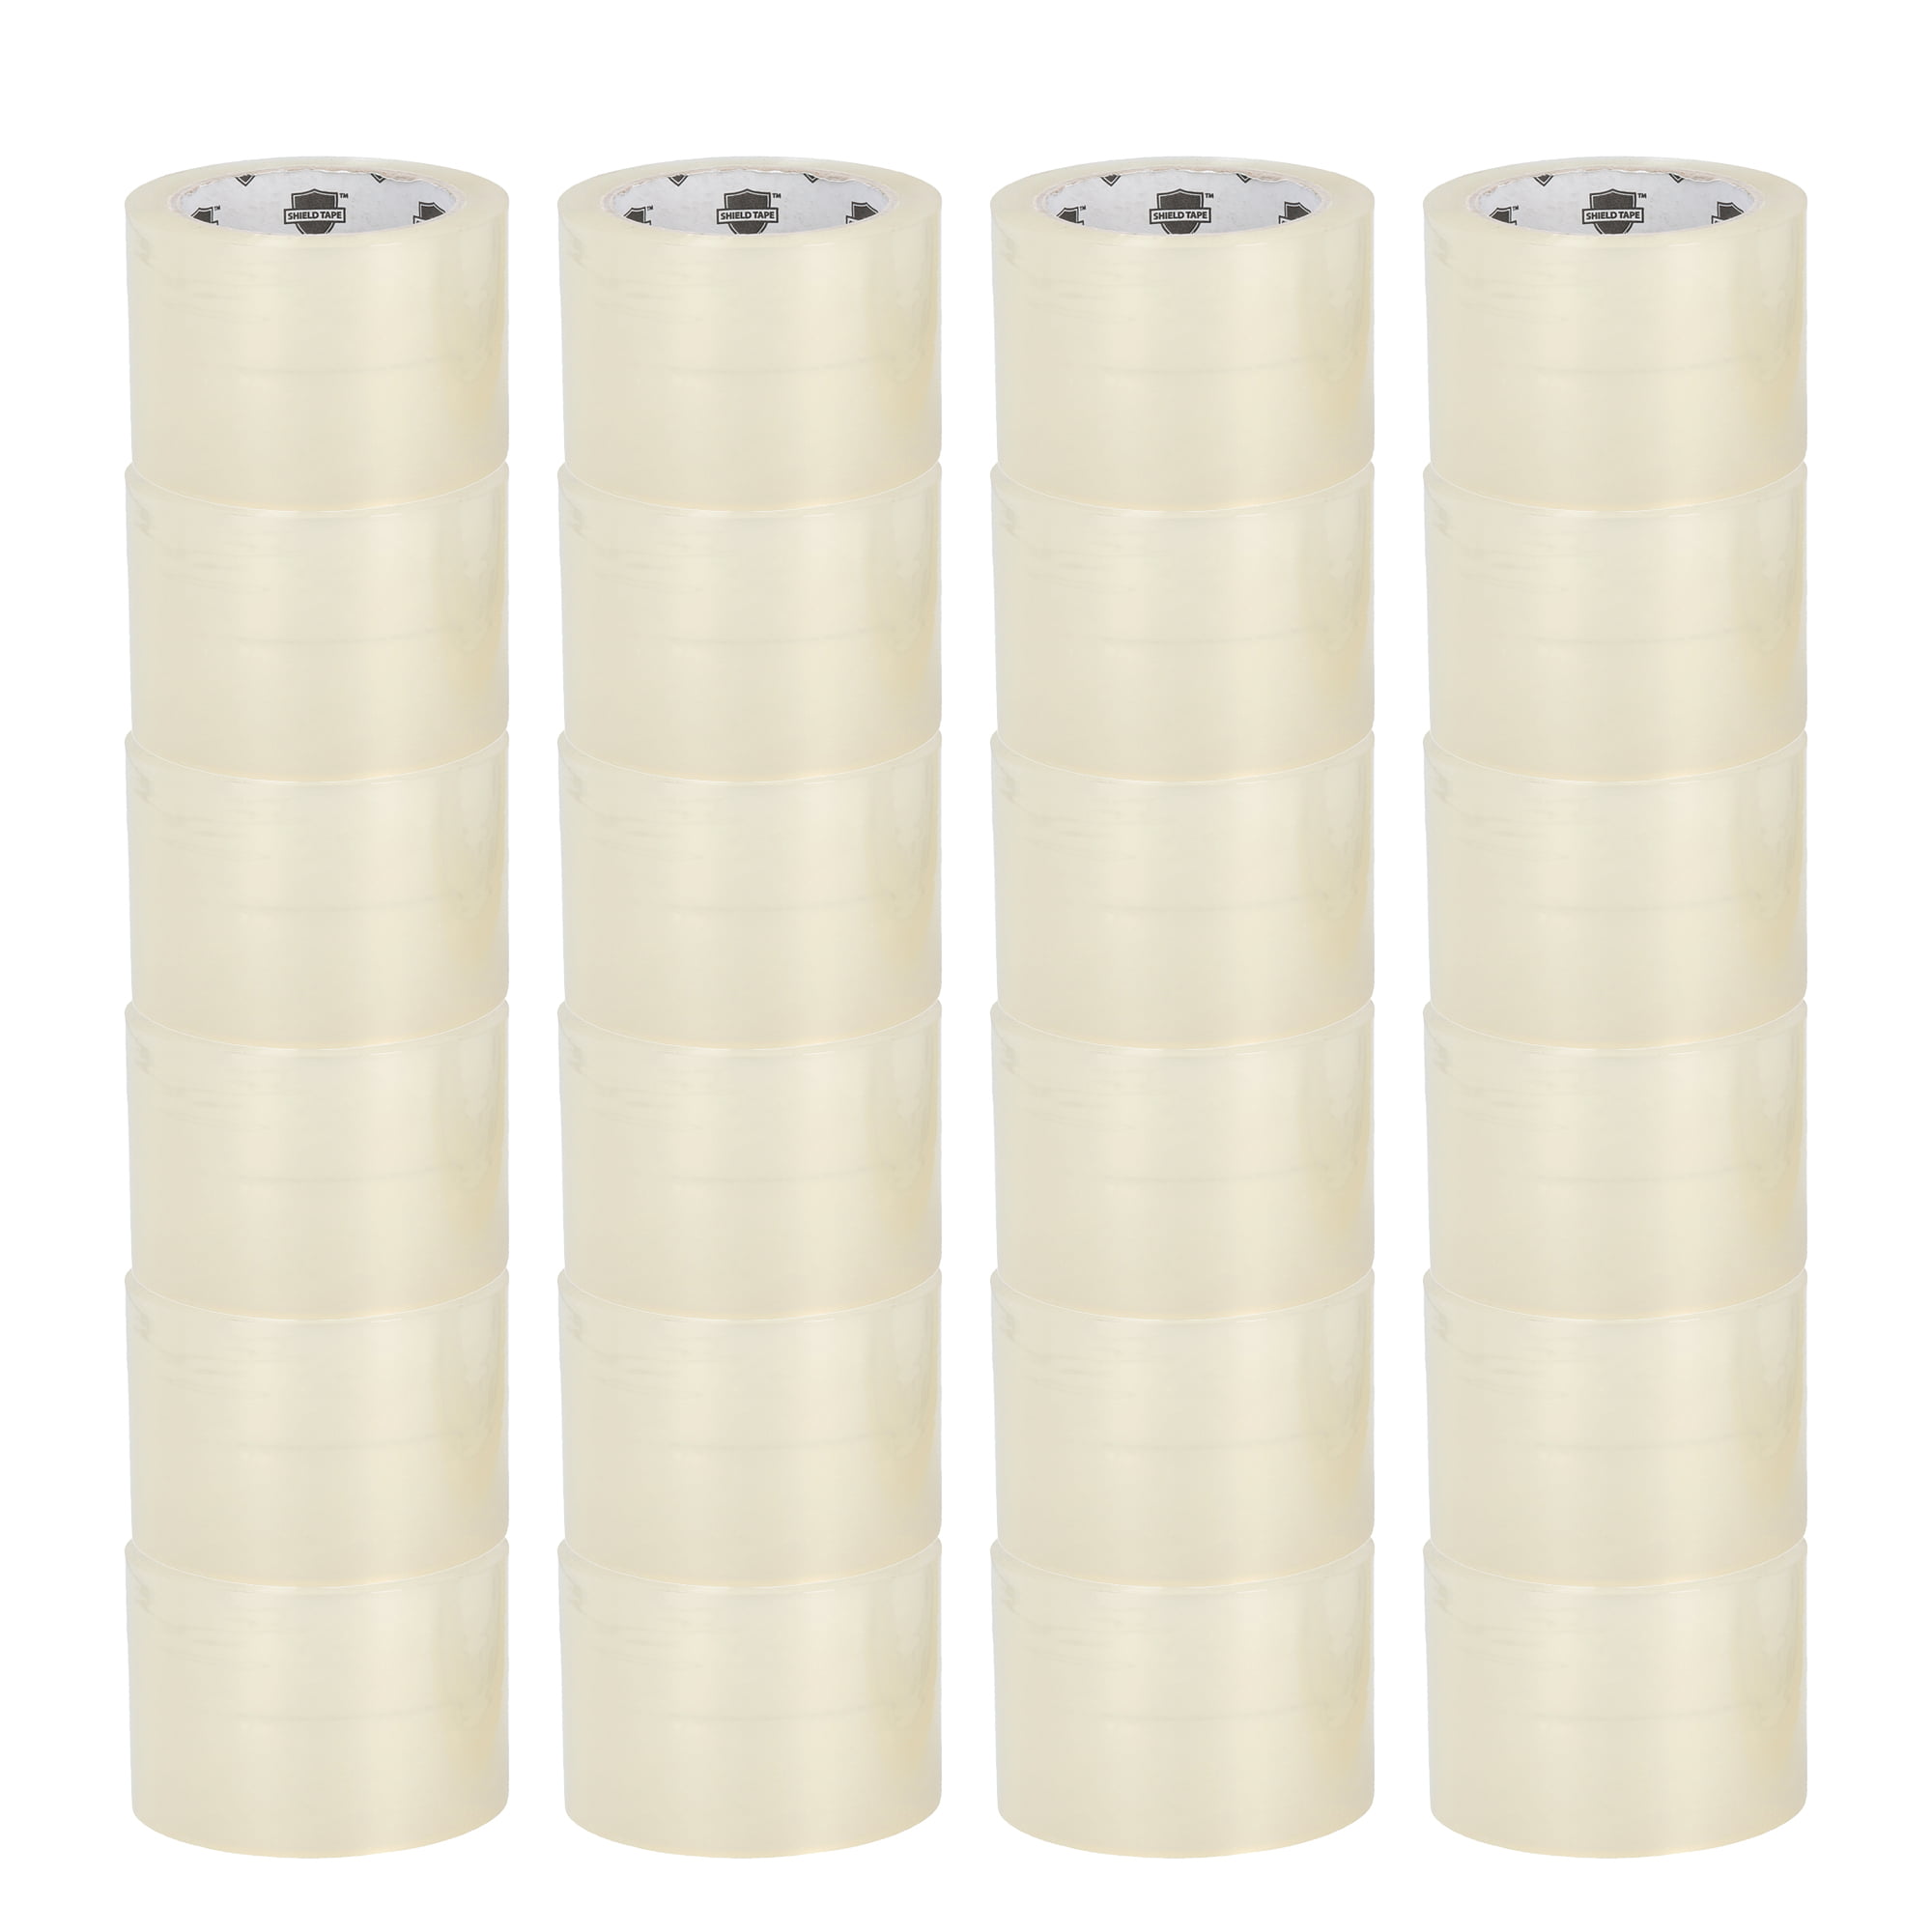 24 Pack Shipping Tape Rolls Clear Packing Tape 1.9 Mil Thick 3 Inch x 110 Yards 